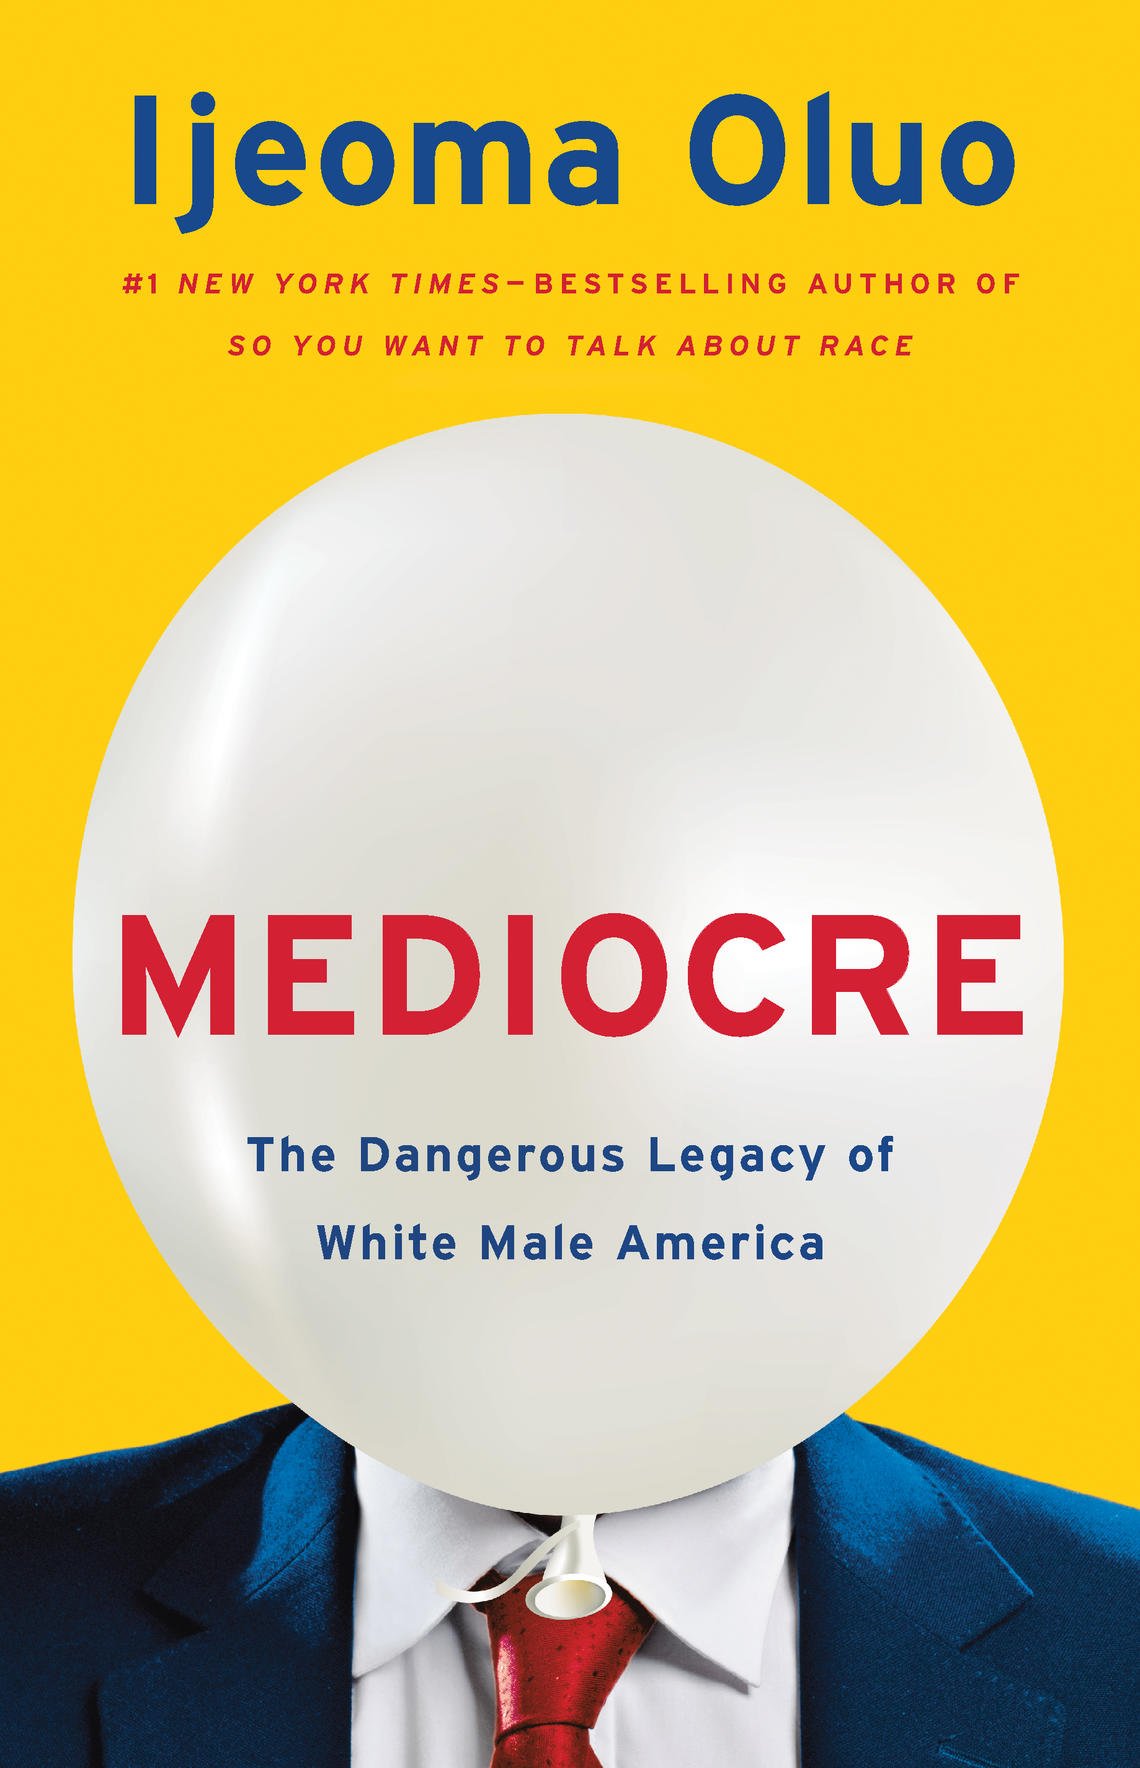 Oluo's most recent book is "Mediocre: The Dangerous Legacy of White Male America"